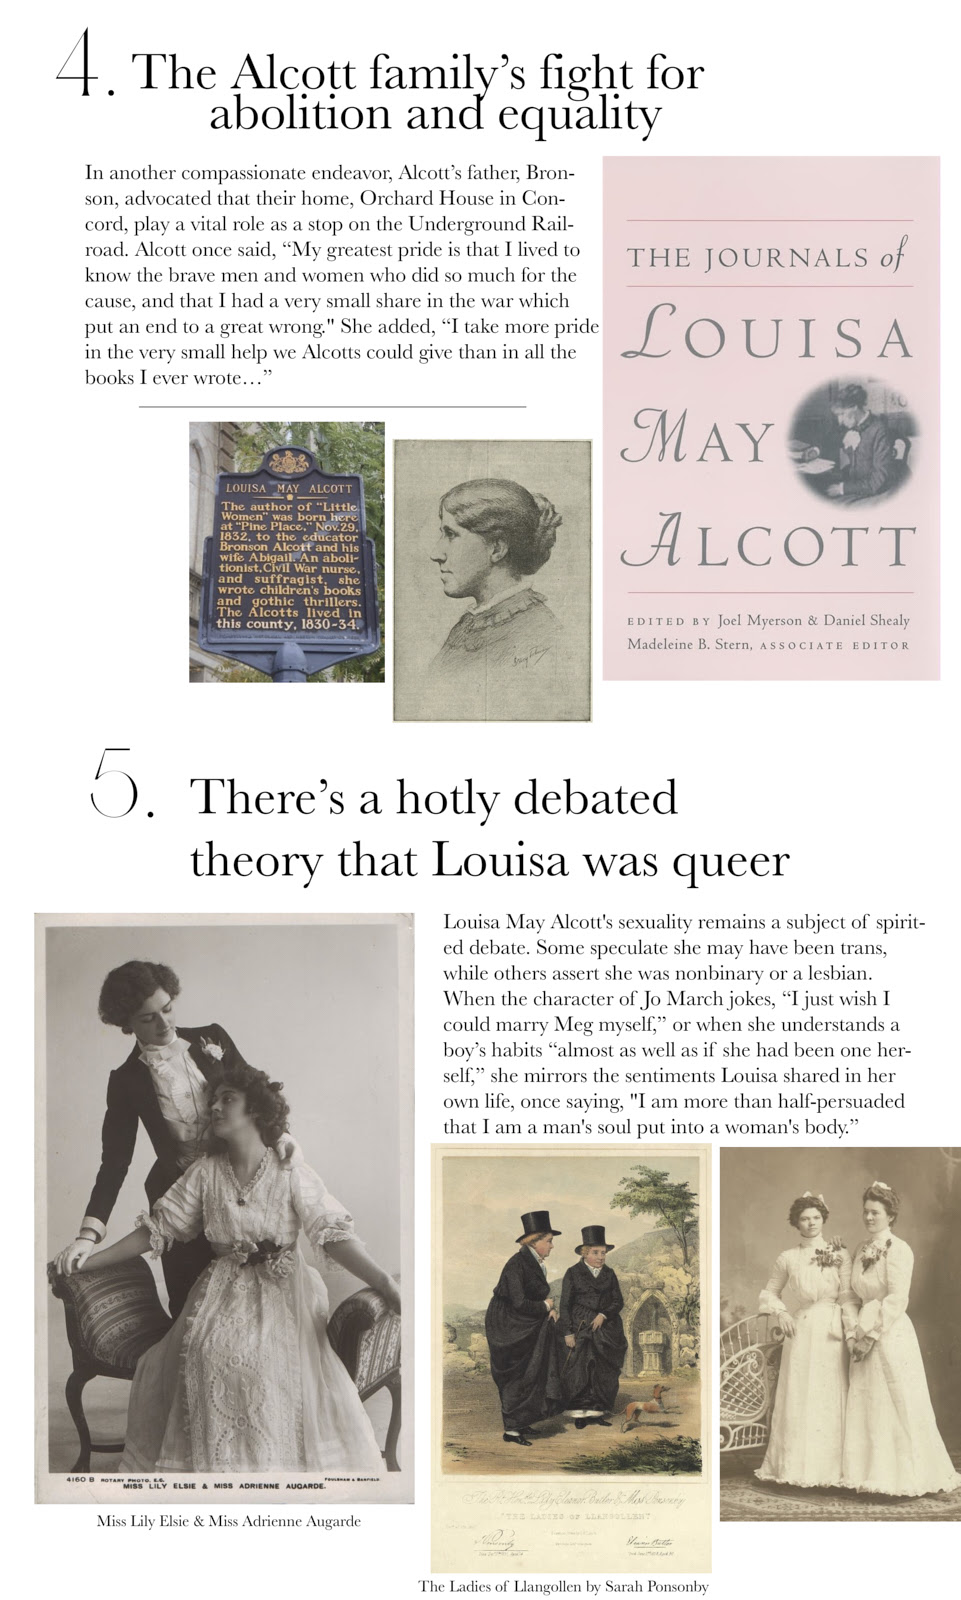 4. The Alcott family's fight for abolition and equality 5. There's a hotly debated theory that Louisa was queer